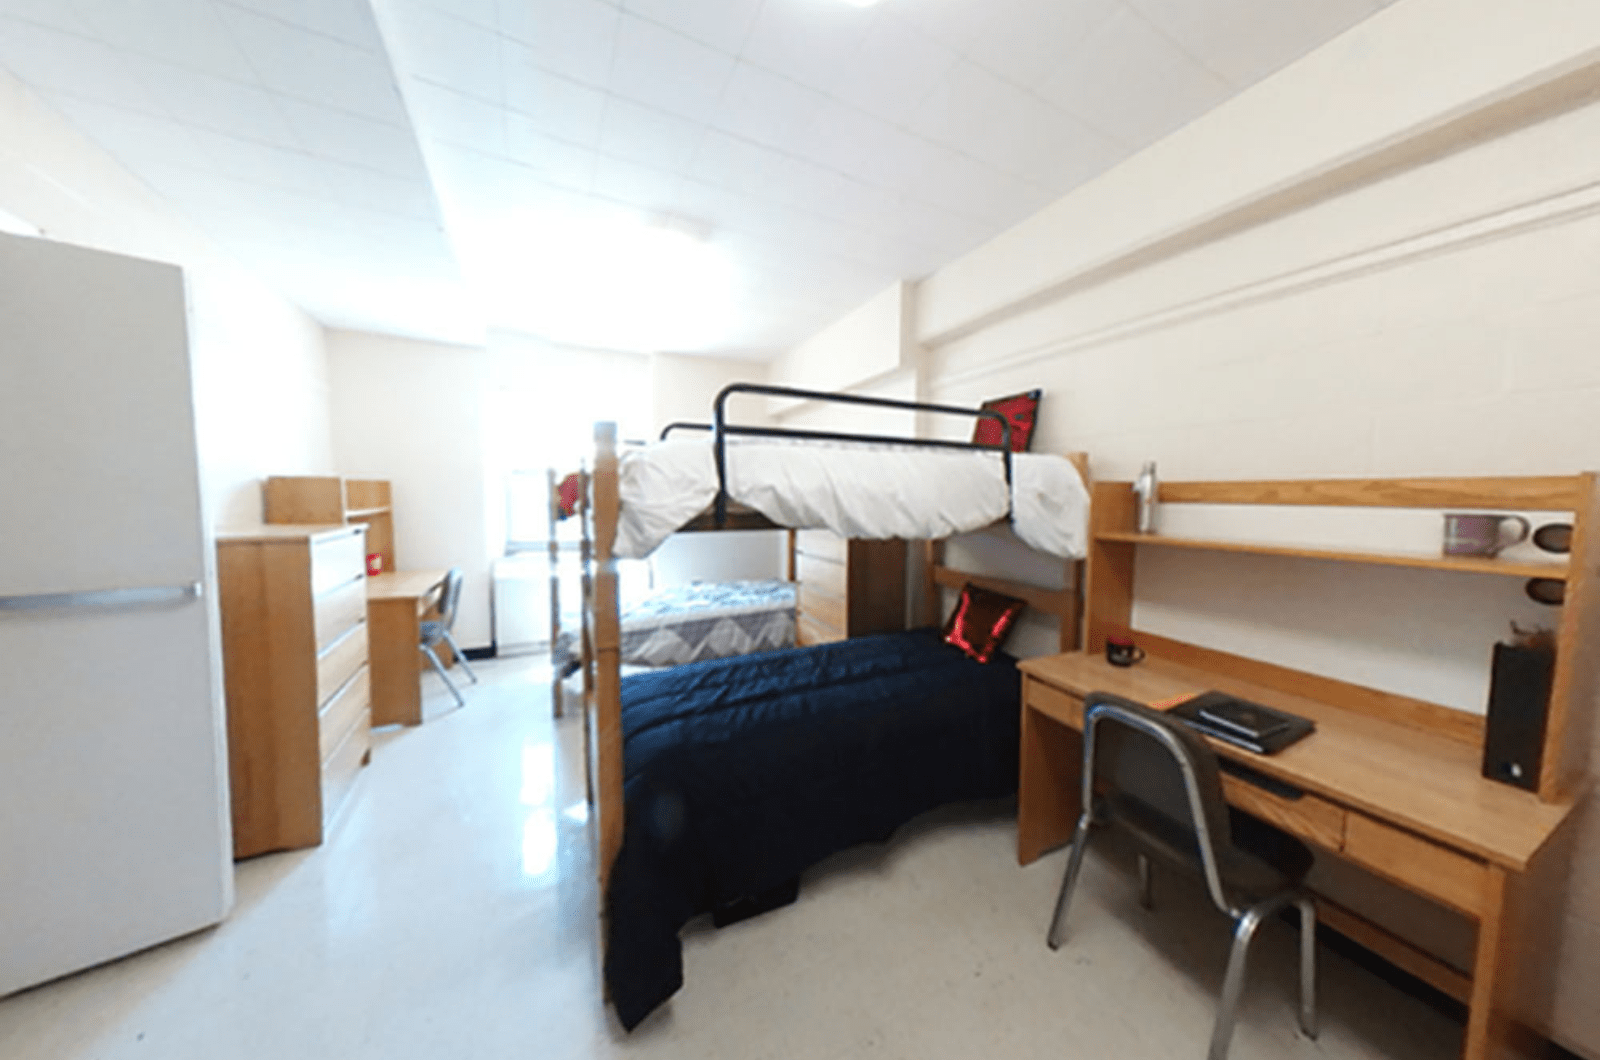 quad room with two bunk beds and a desk int the foreground